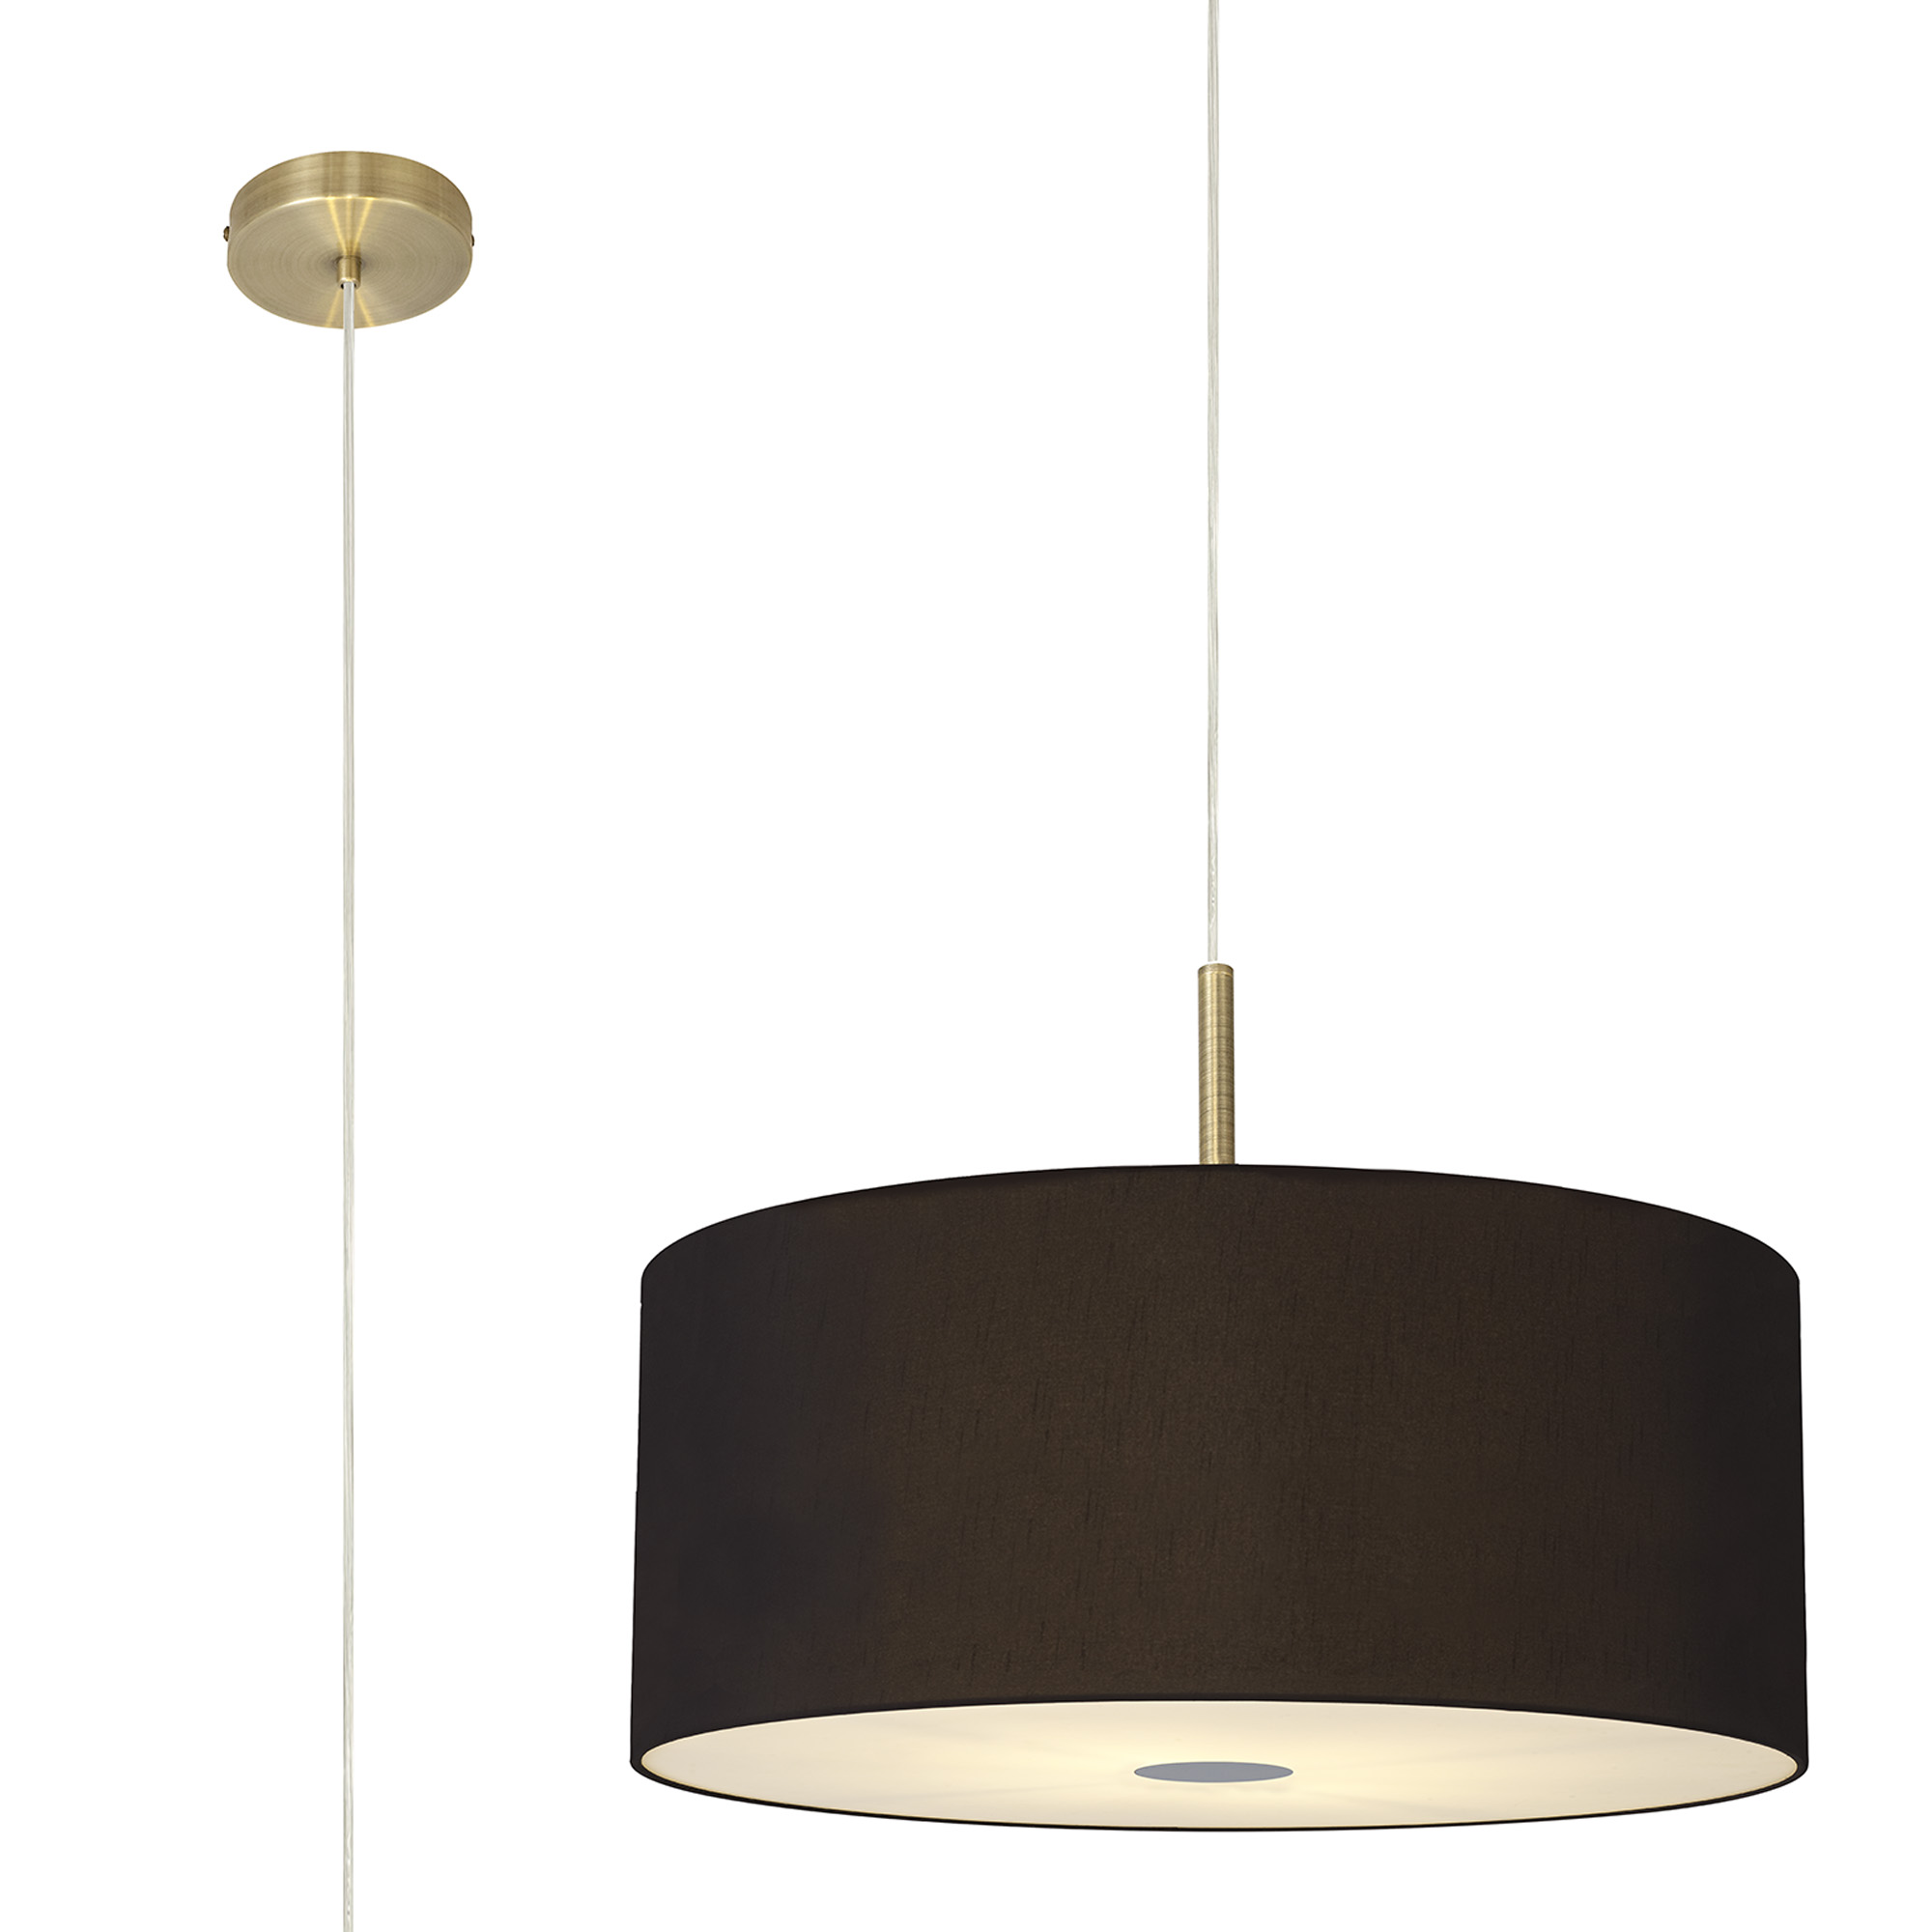 DK0521  Baymont 60cm 5 Light Pendant Antique Brass, Midnight Black/Green Olive, Frosted Diffuser